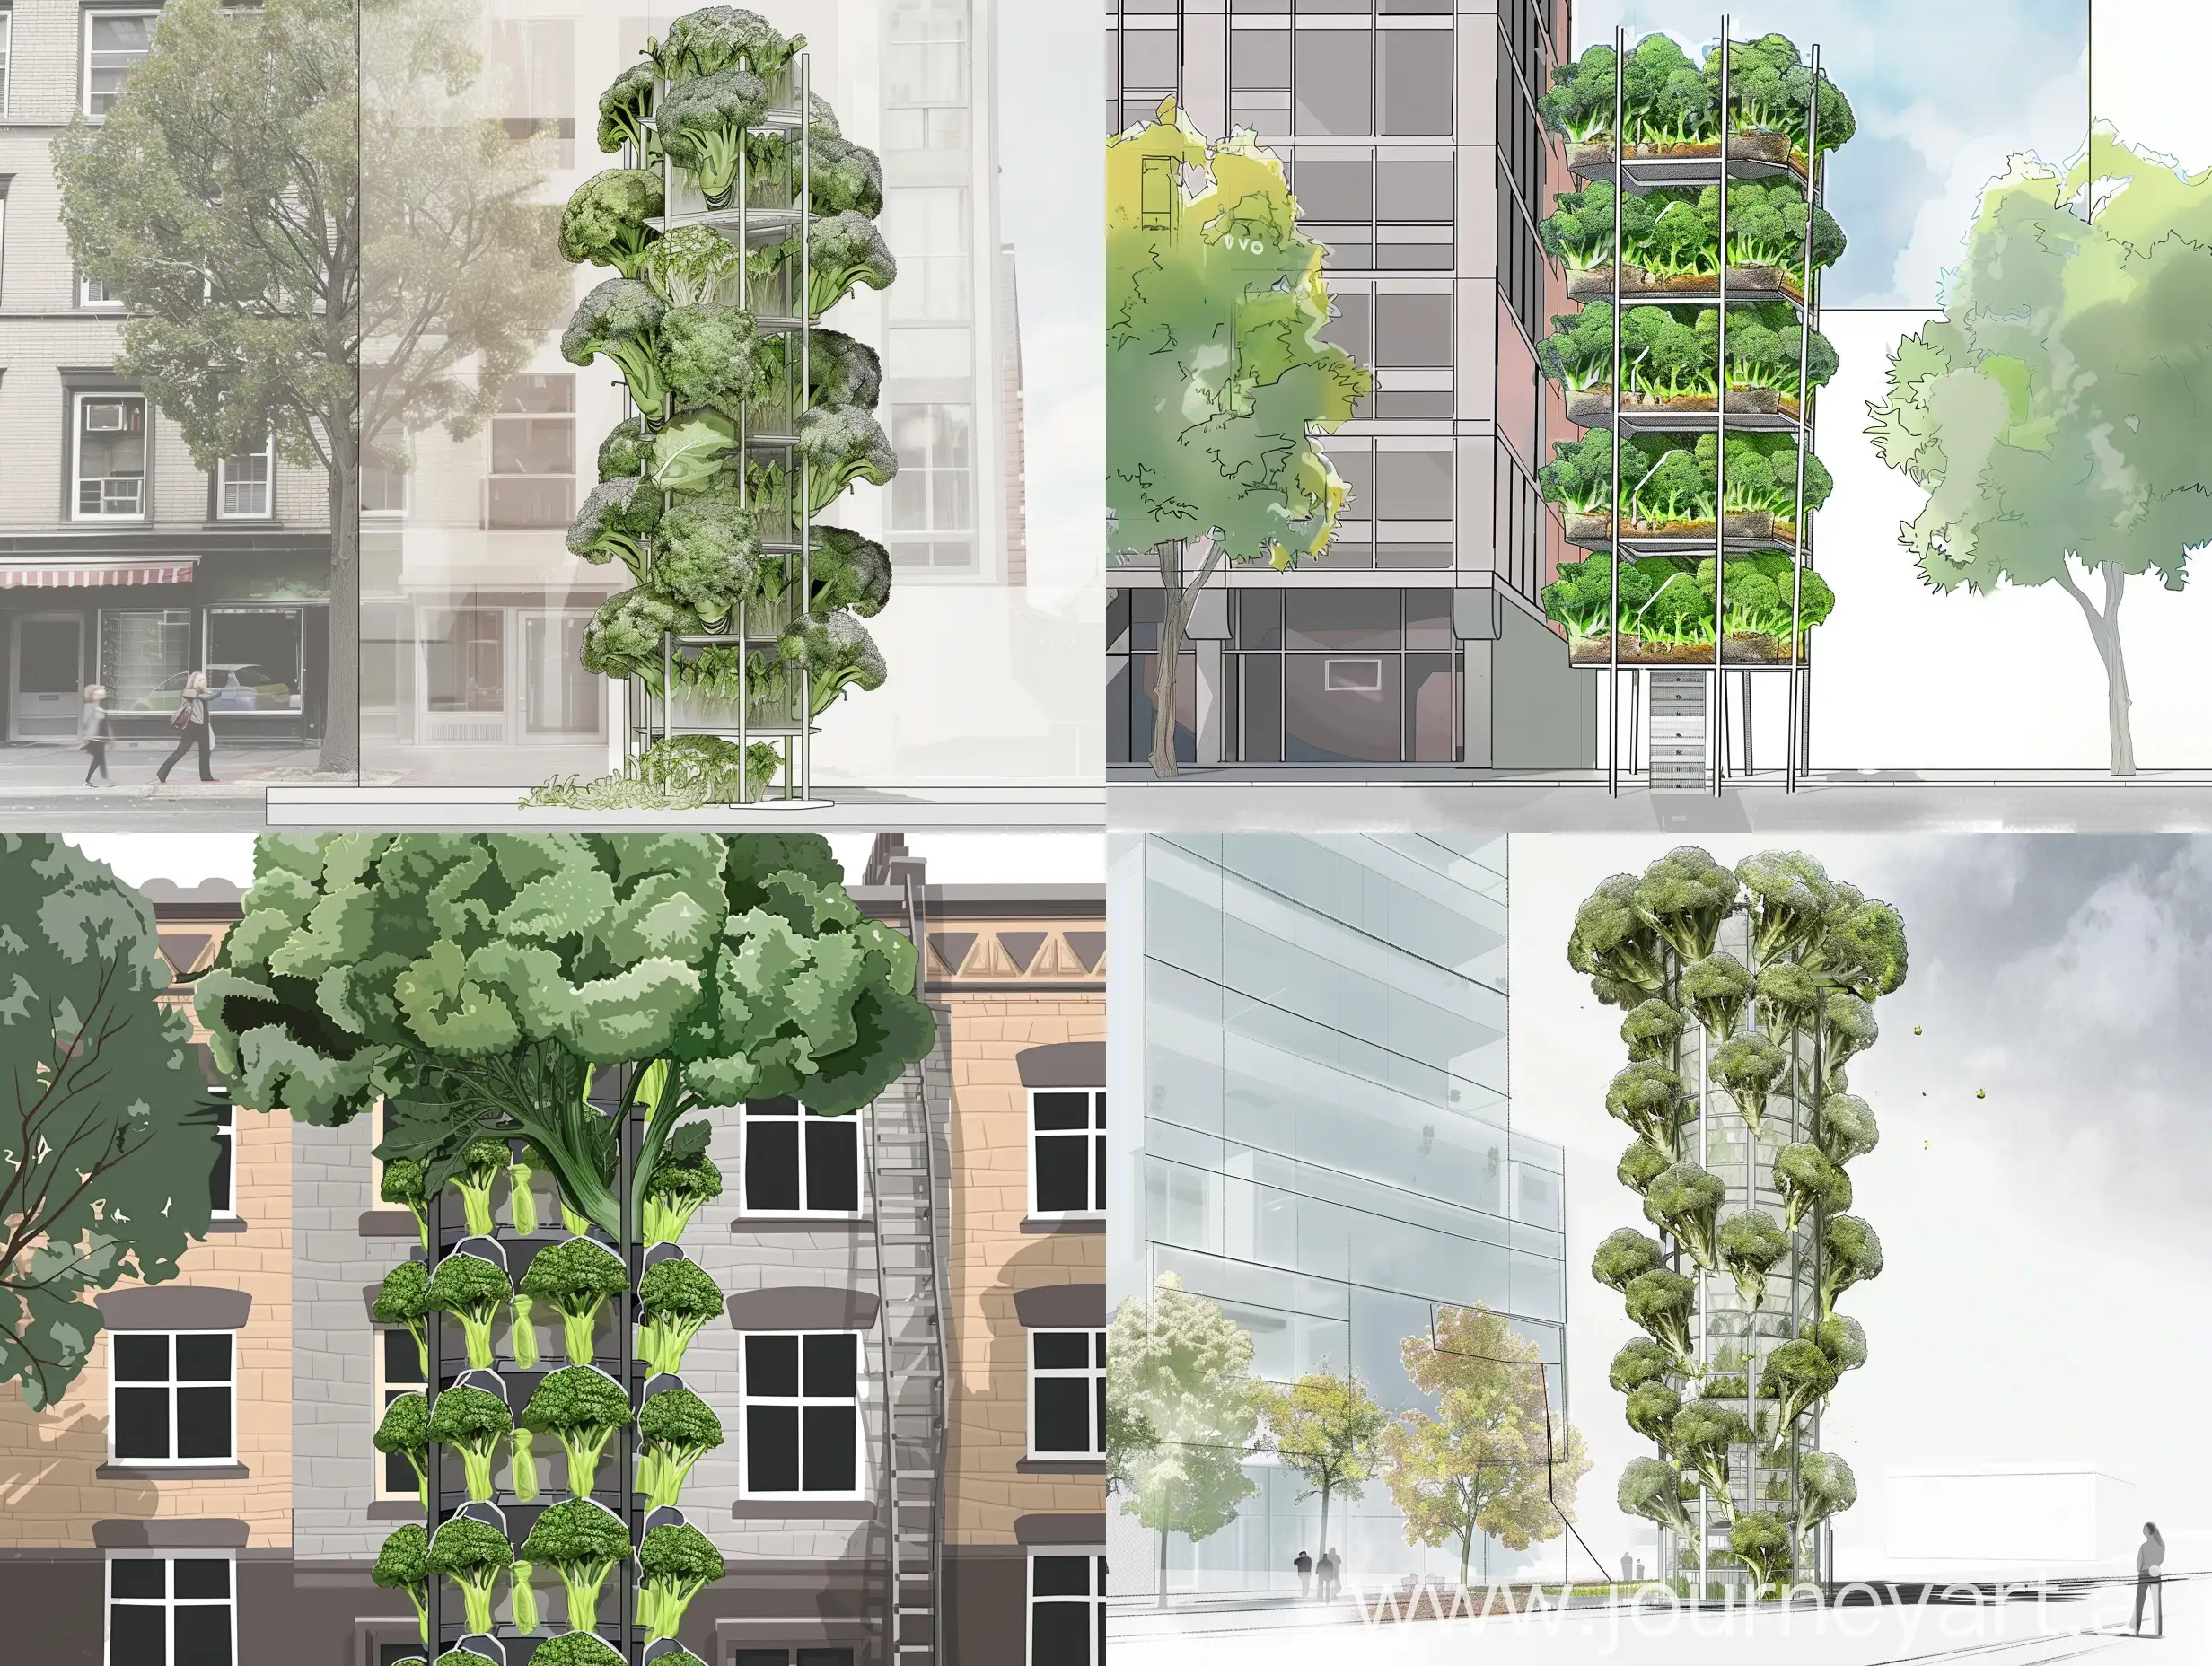 draw vertical hydroponic tower growing vegetable like broccolis coleslaw ... on building facade